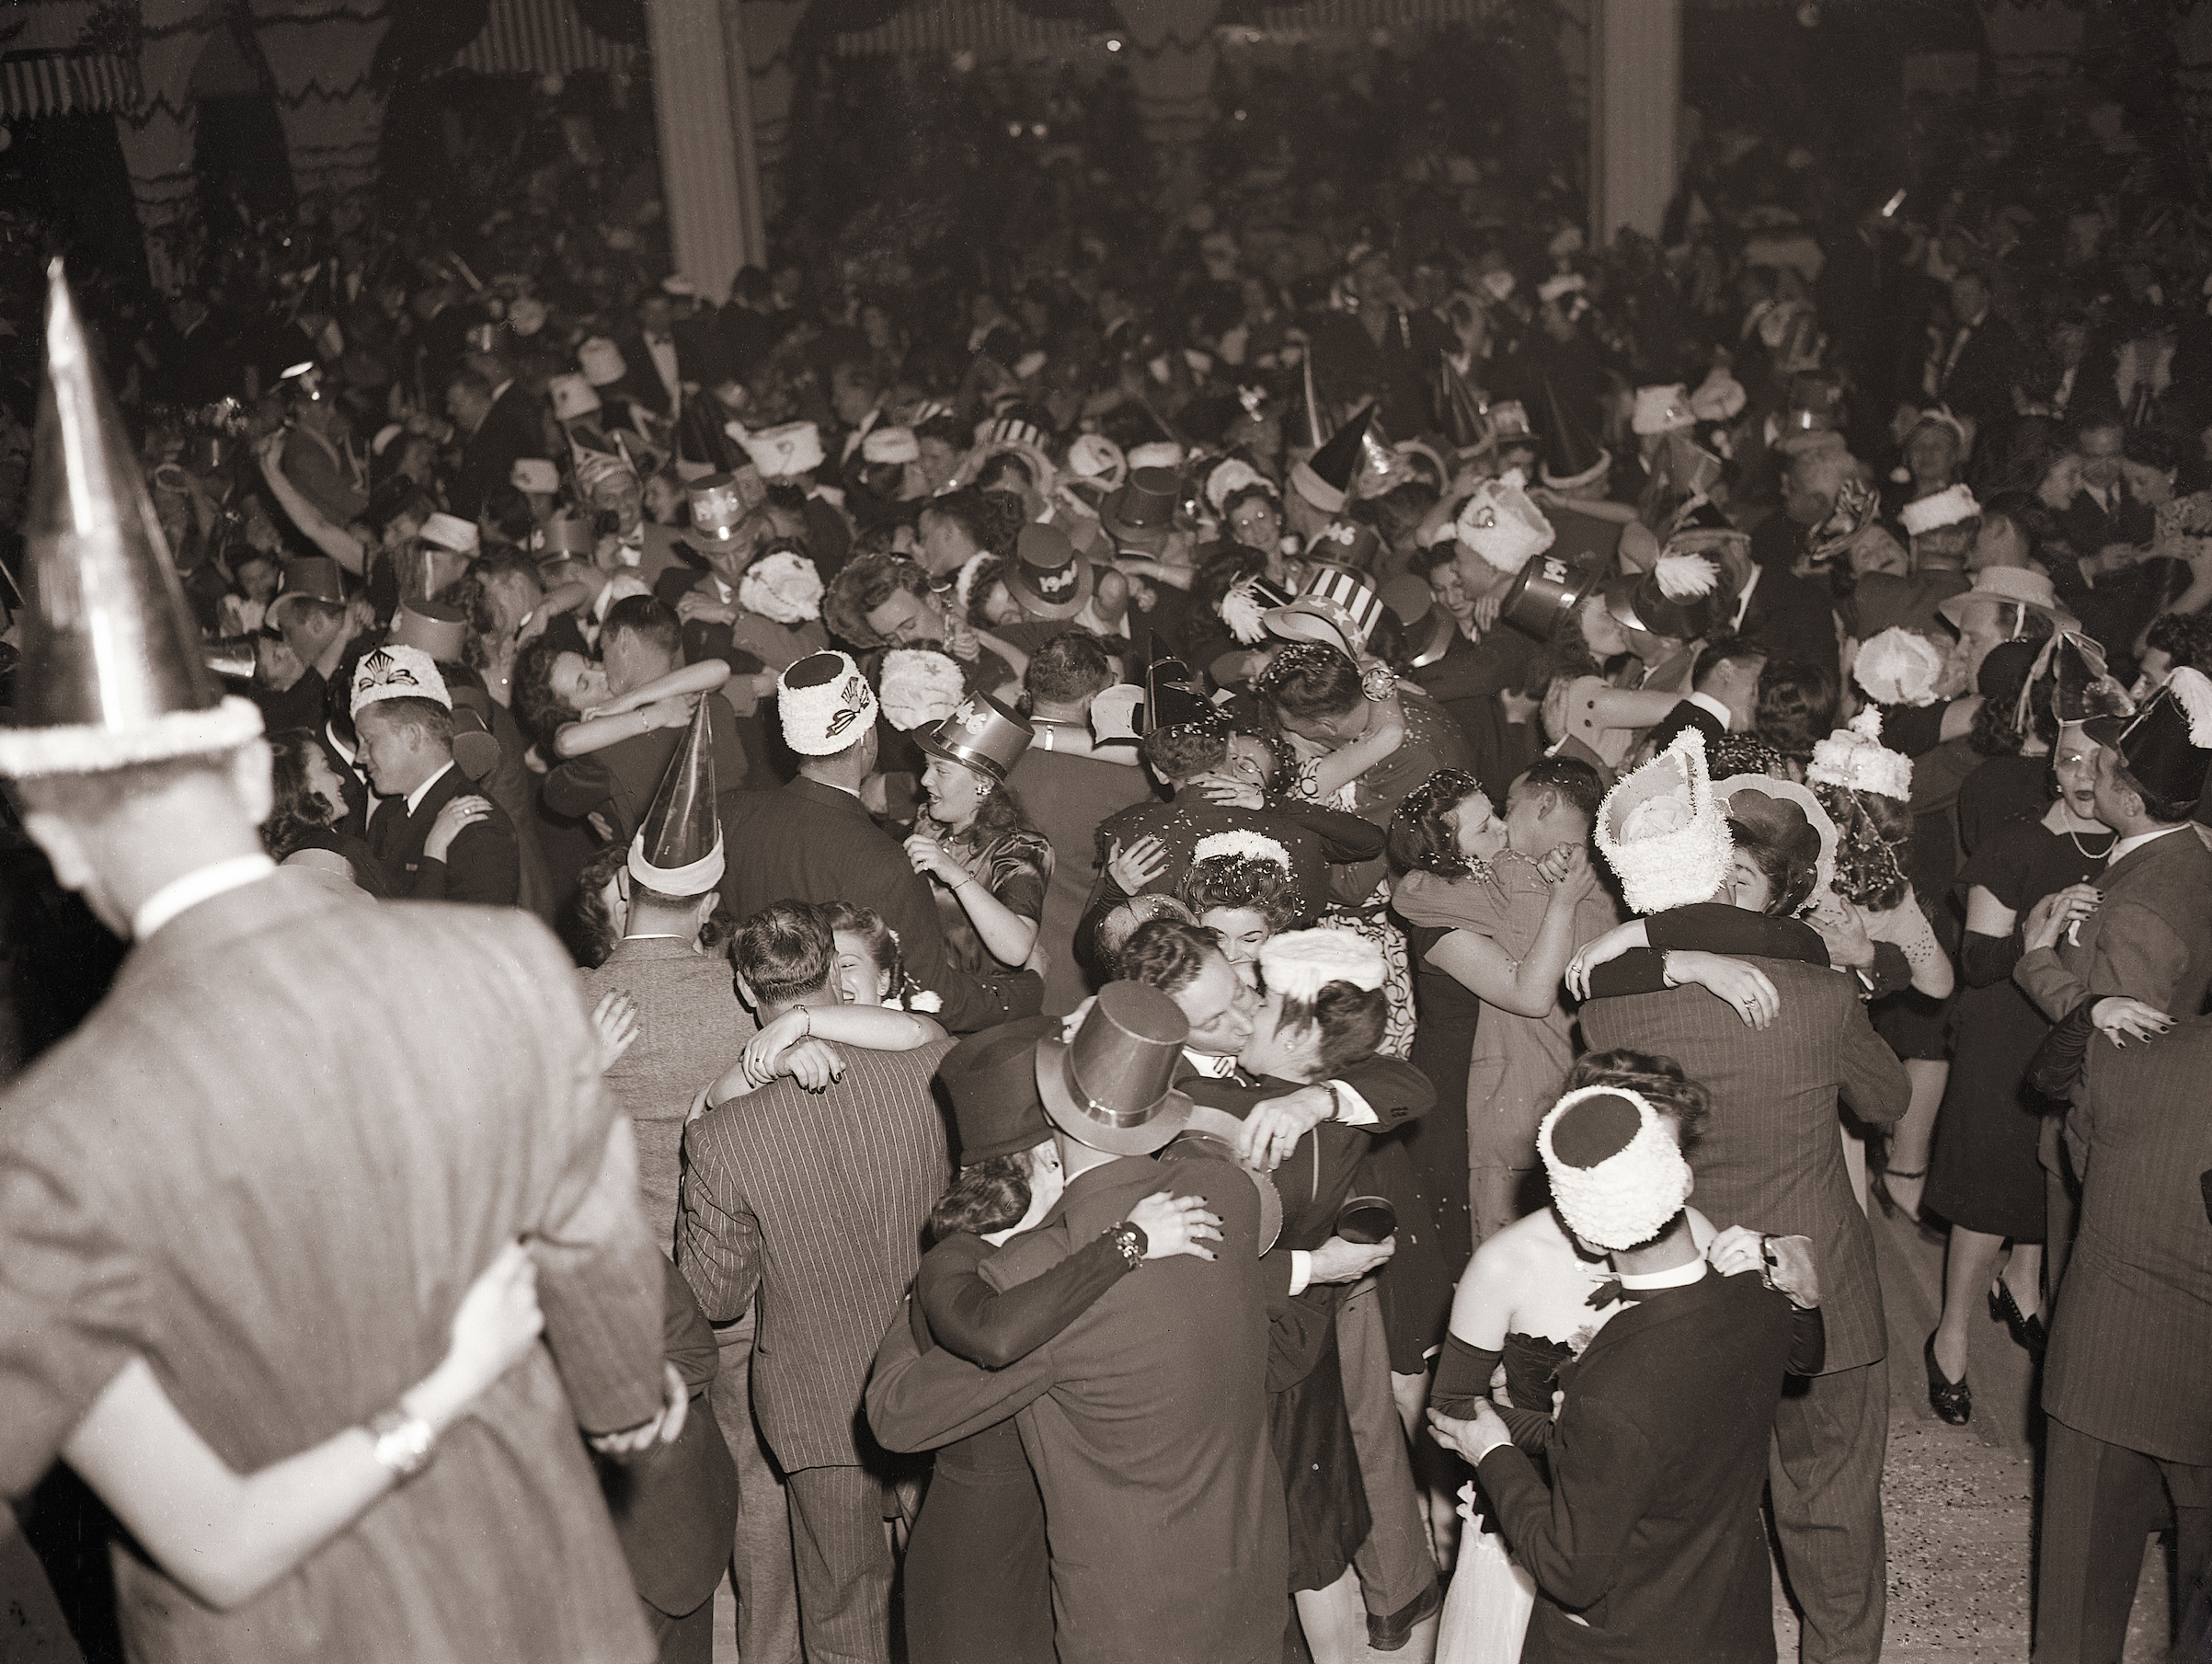 New Year's Eve at the Diamond Horse-shoe in New York, N.Y., on Dec. 31, 1941. (Bettmann/Getty Images)